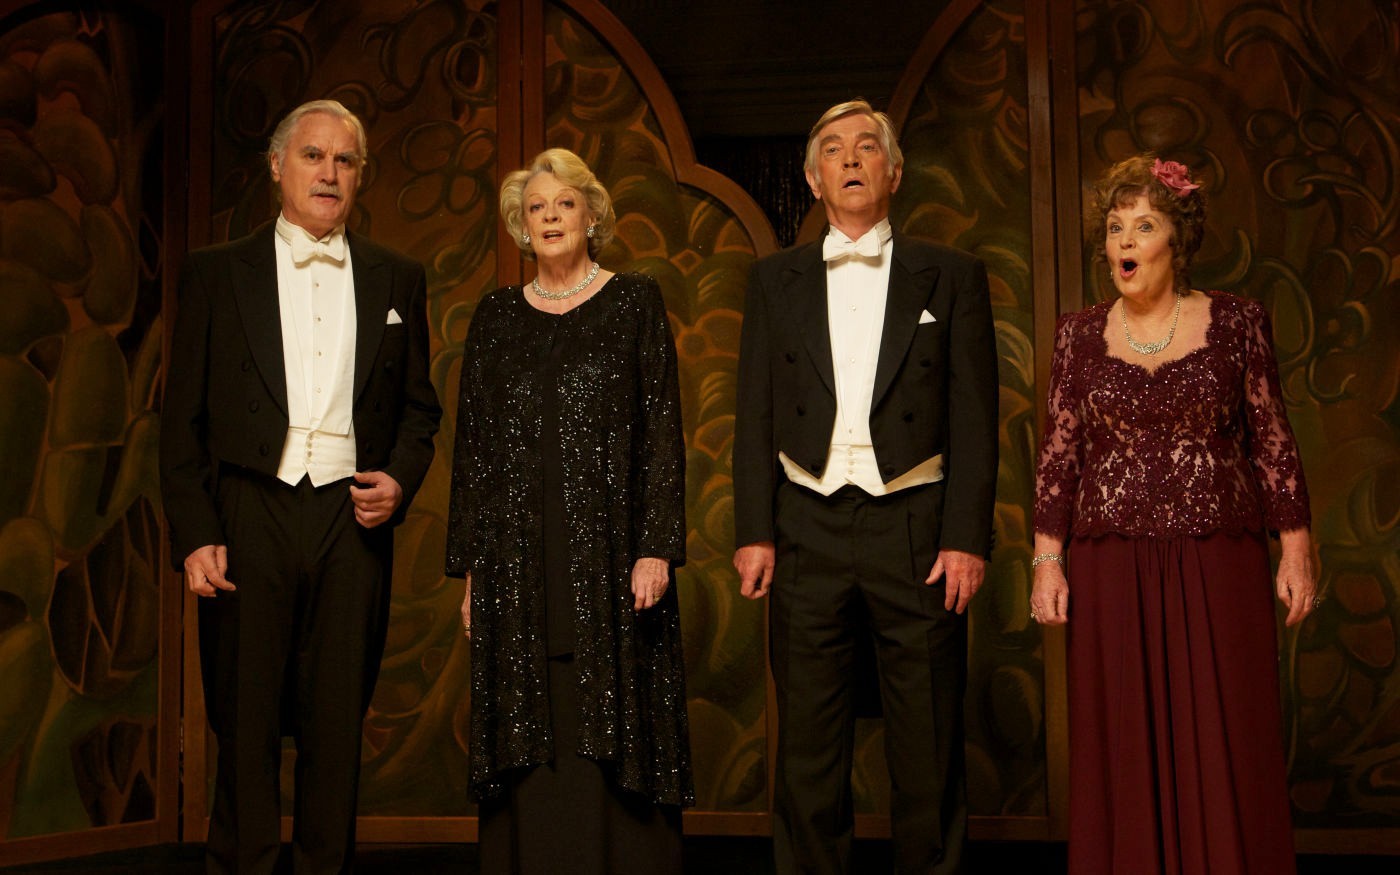 Billy Connolly, Maggie Smith, Tom Courtenay and Pauline Collins in The Weinstein Company's Quartet (2013). Photo credit by Kerry Brown.